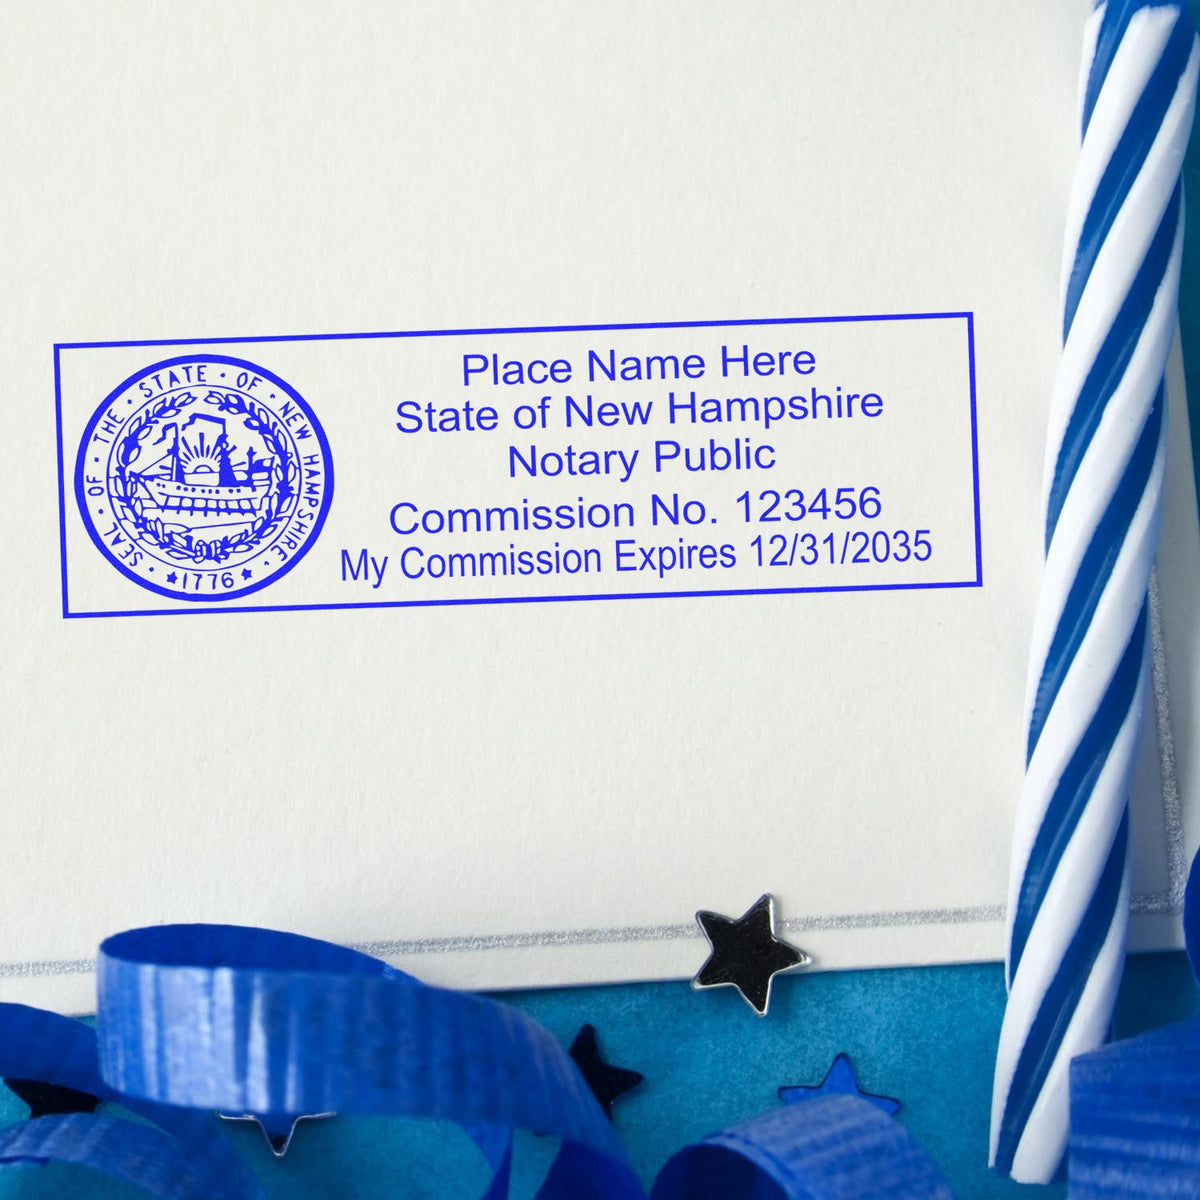 An alternative view of the PSI New Hampshire Notary Stamp stamped on a sheet of paper showing the image in use